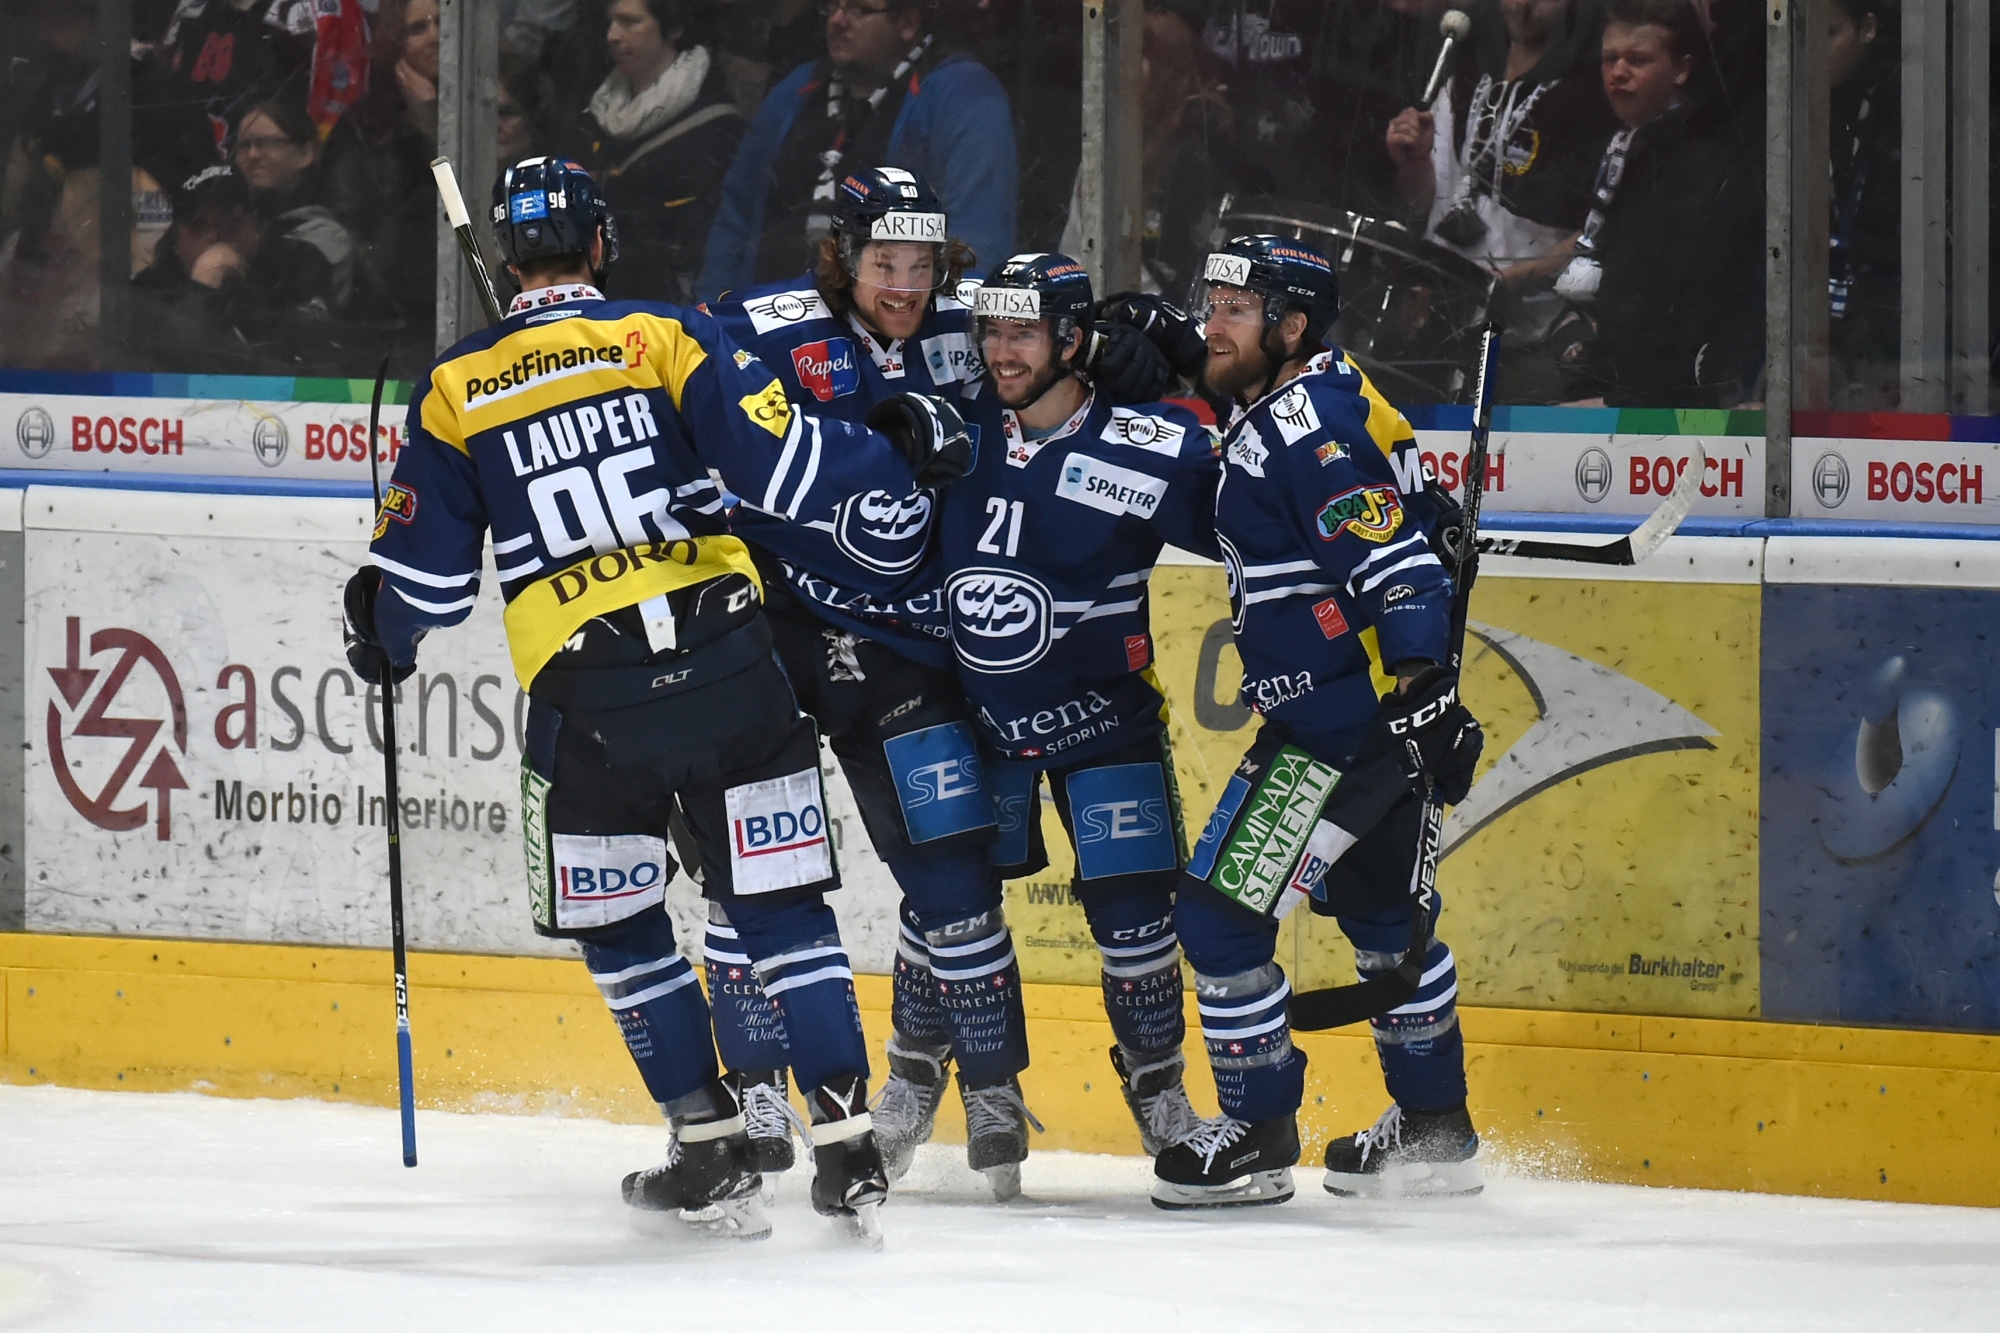 From left, Ambri's player Adrien Lauper, Ambri's player Franco Collenberg, Ambri's player Jason Fuchs and Ambri's player Mikko Maeenpaeae, celebrate 1-1, during the fourth Playout final game of National League A (NLA) Swiss Championship 2016/17 between HC Ambri Piotta and Fribourg Gotteron, at the ice stadium Valascia in Ambri, Switzerland, Tuesday, March 28, 2017. (KEYSTONE/Ti-Press/Pablo Gianinazzi) SCHWEIZ EISHOCKEY PLAYOUT-FINAL AMBRI FRIBOURG